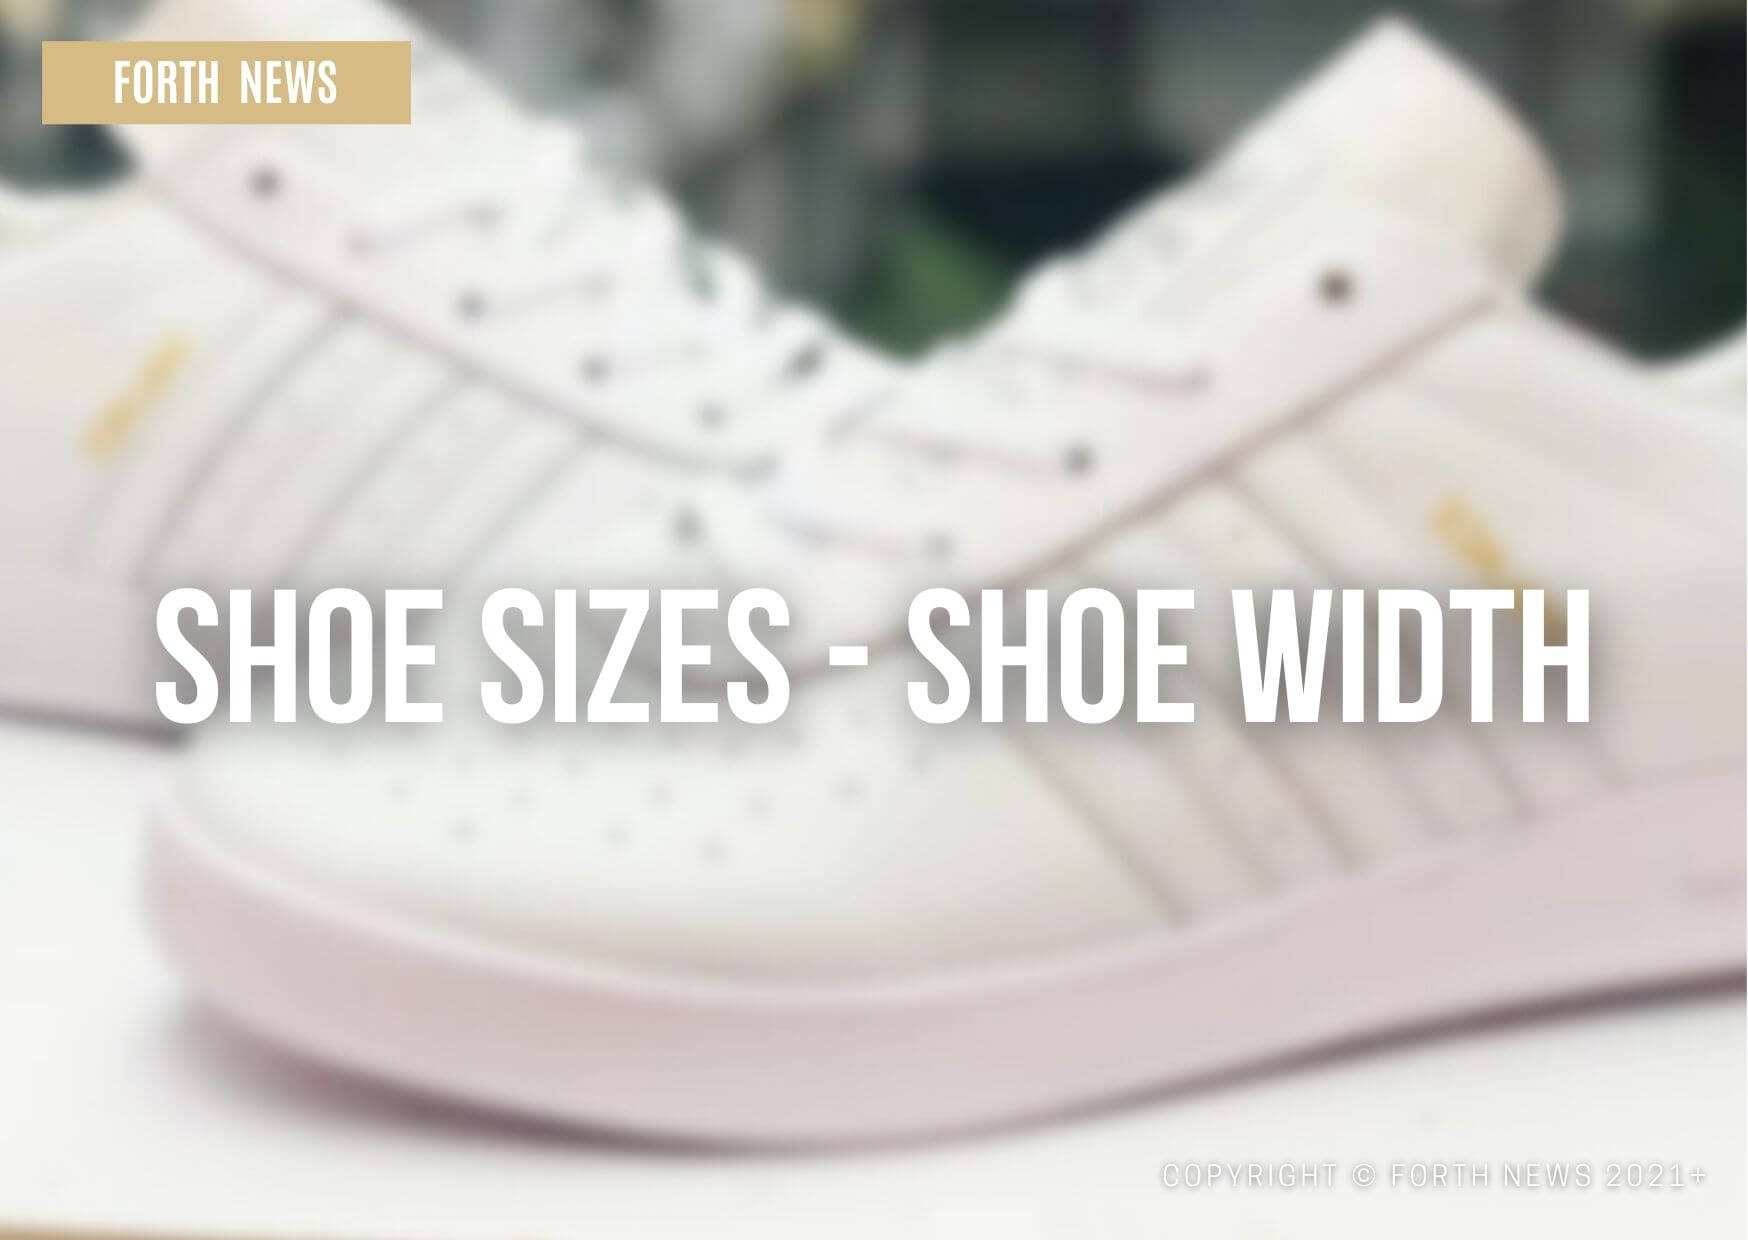 FORTH News - What Shoes Width Sizes Mean: AAA, AA, E, EE, EEE, D, and DD